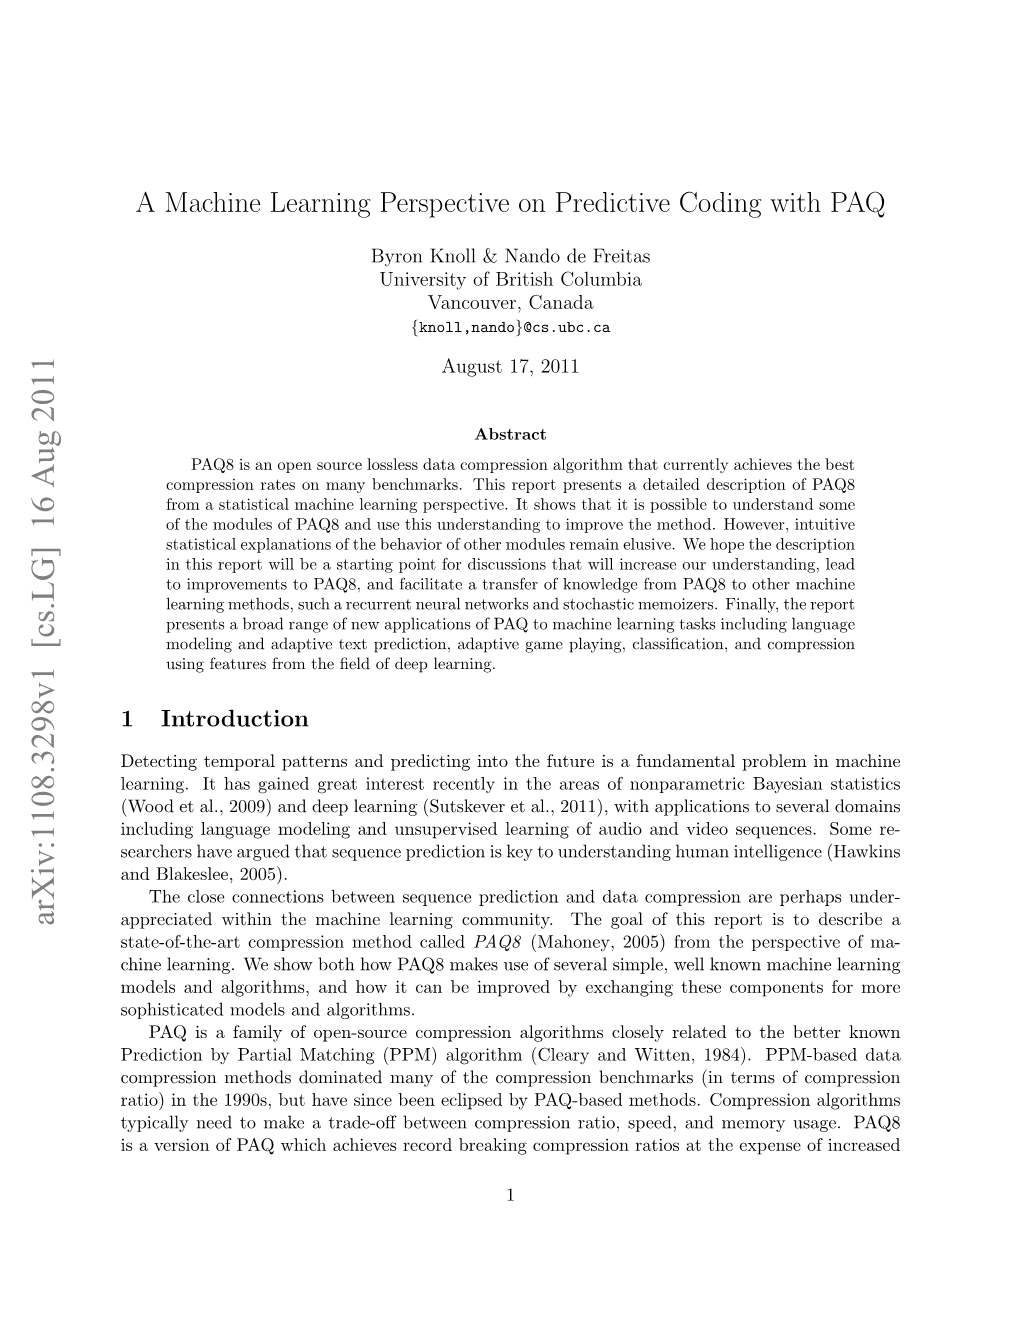 A Machine Learning Perspective on Predictive Coding with PAQ